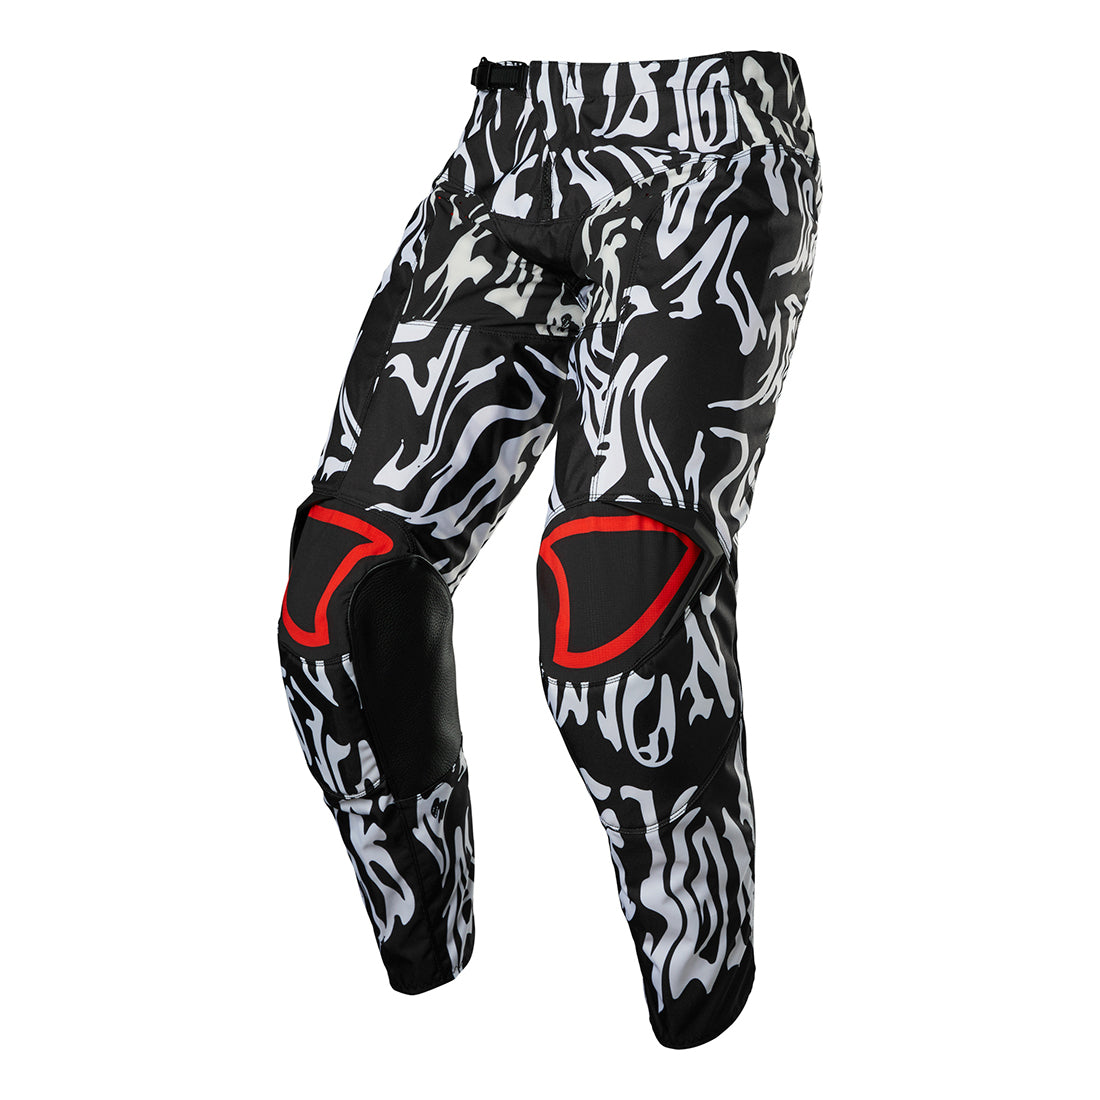 180 Peril Pant Youth - Fox Racing South Africa